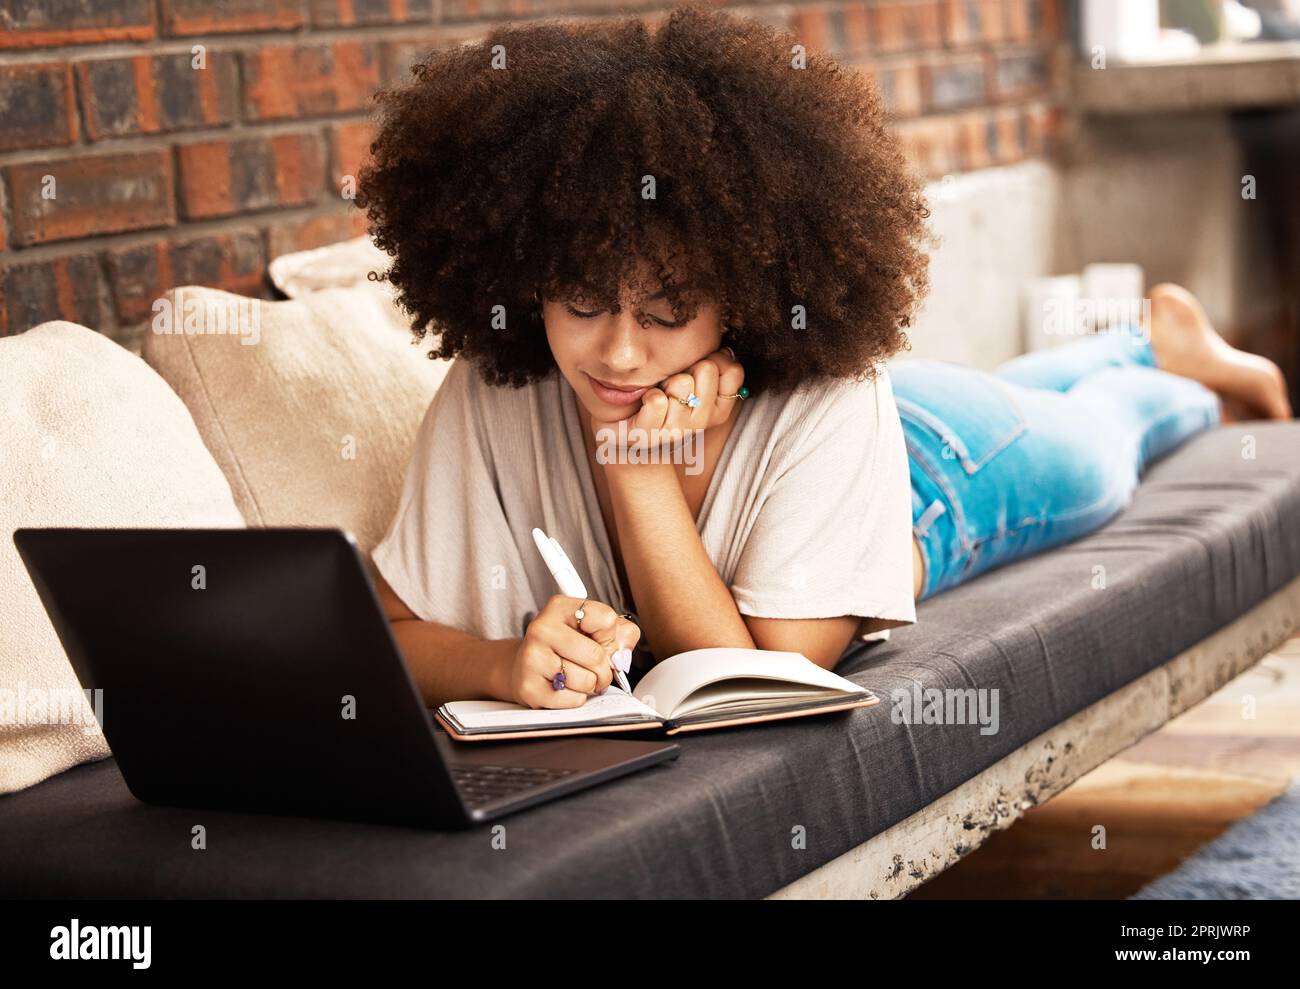 Education, learning and writing with a woman student studying online with her laptop on a sofa in her home living room. Study, growth and development with a female learner taking notes for an exam Stock Photo